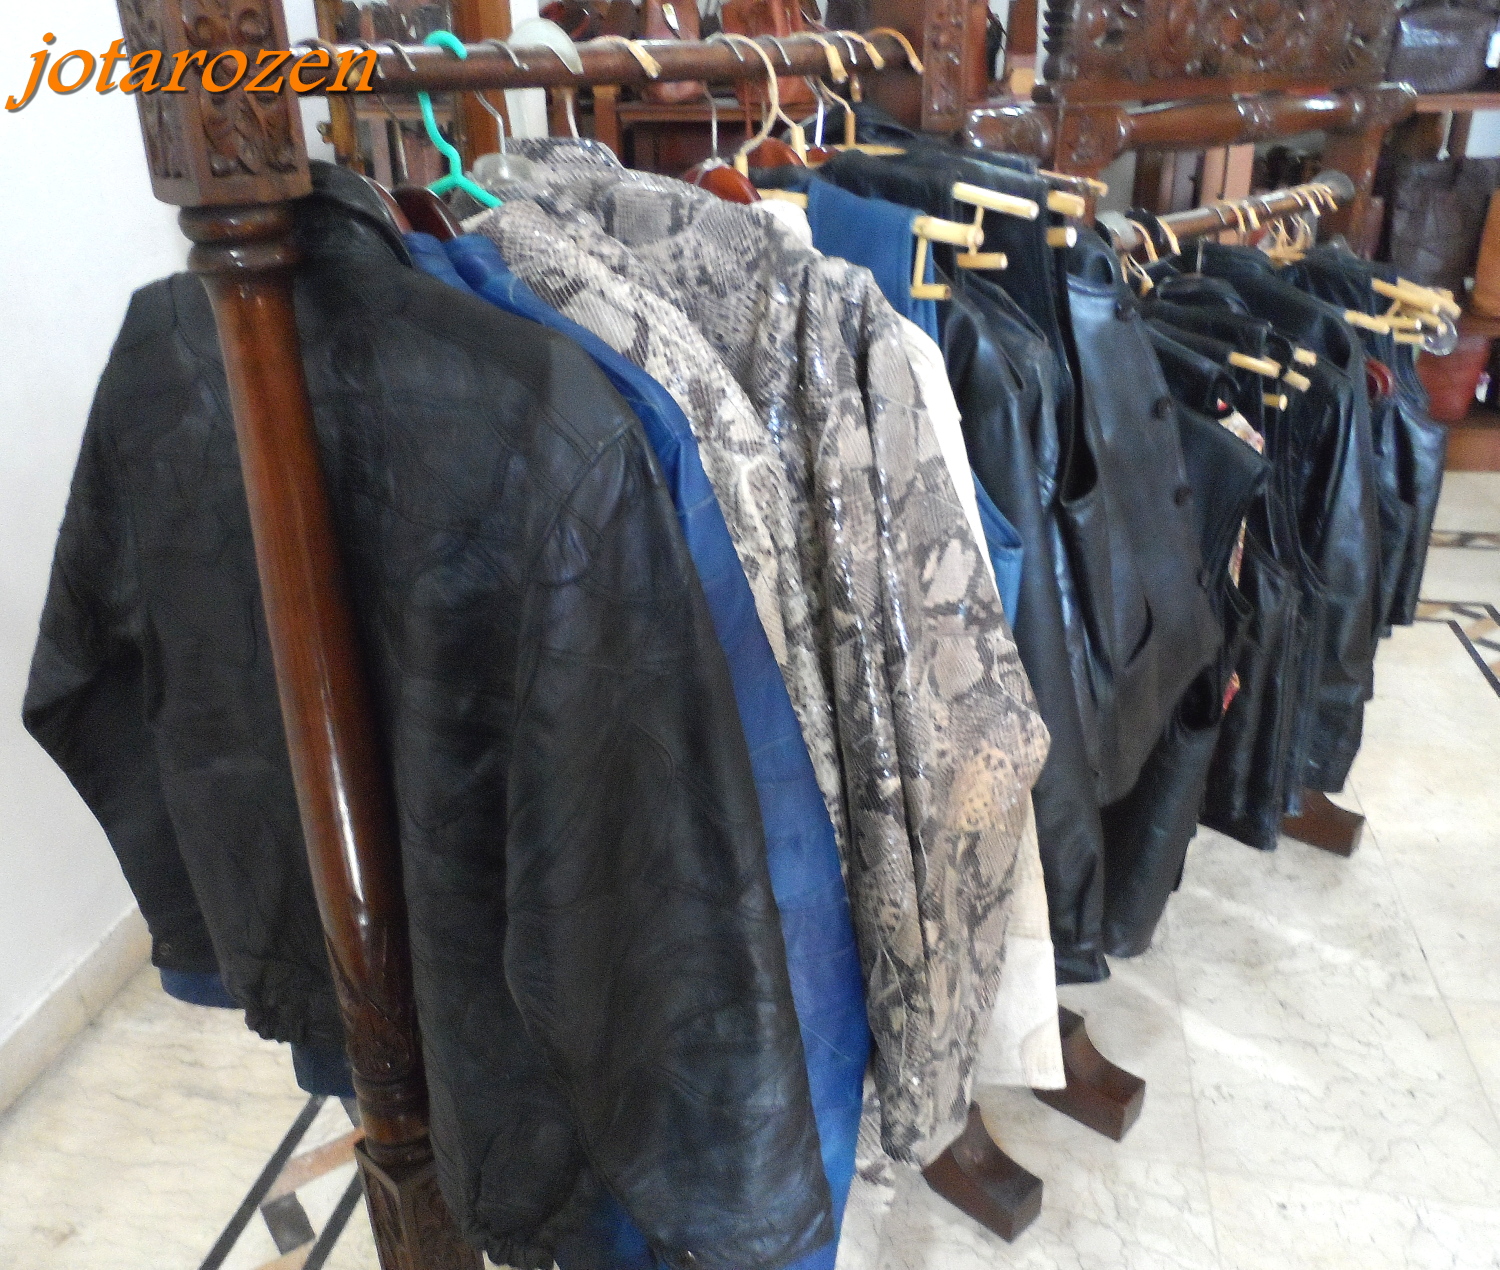 Cheap Leather Goods At Yashwant Place | LBB Delhi